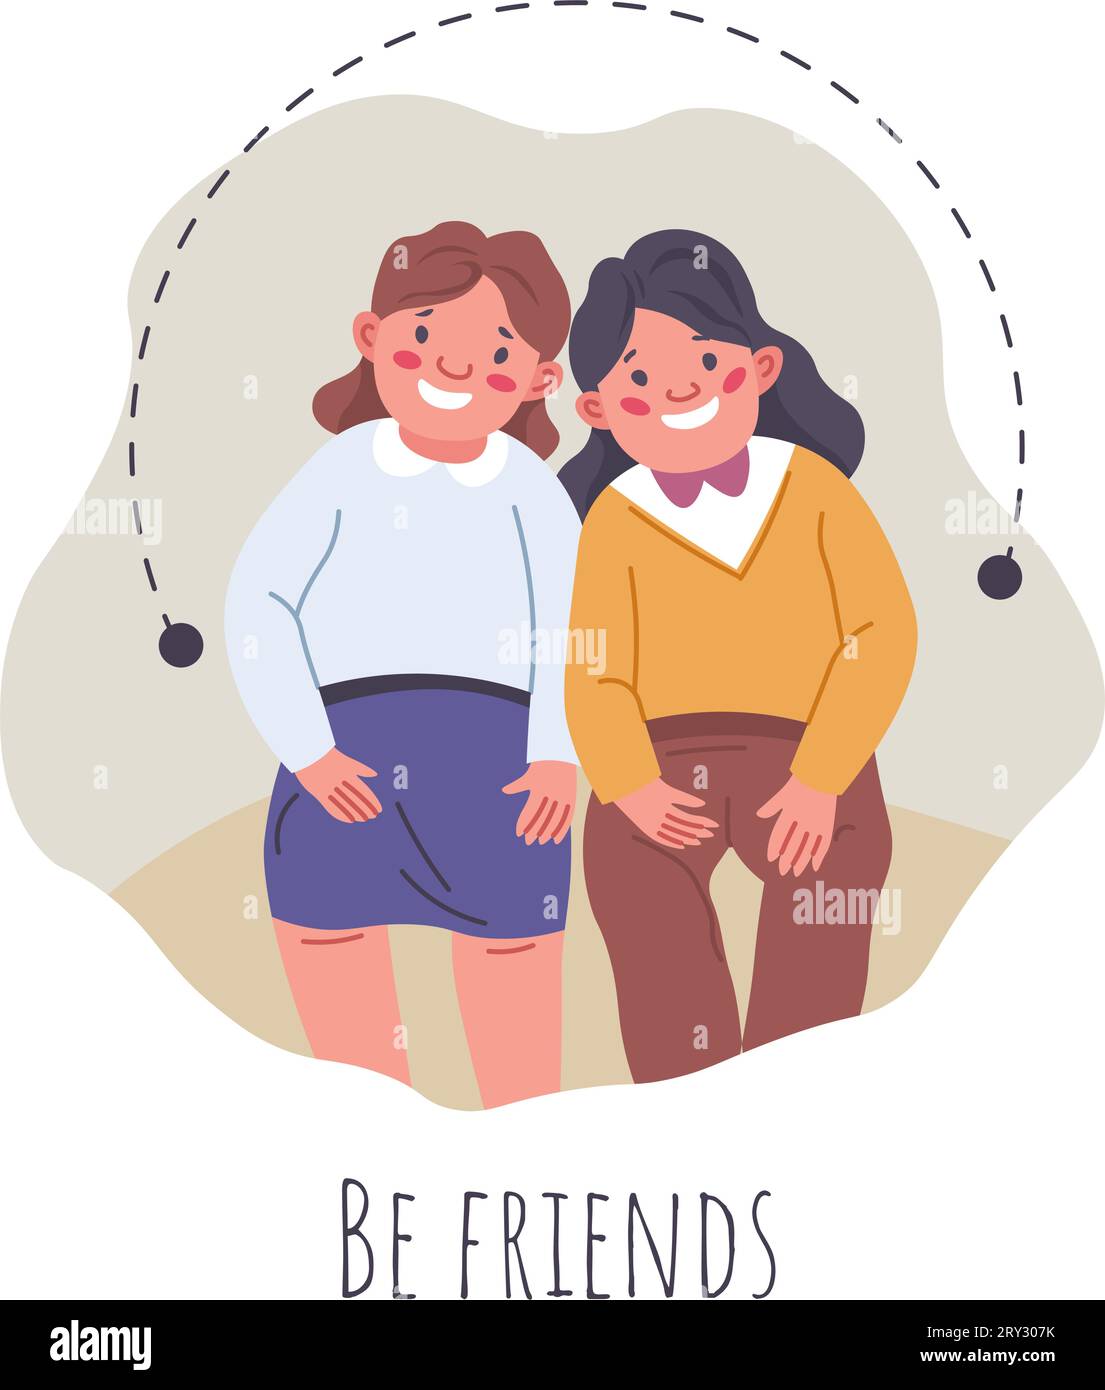 Be friends with children with down syndrome vector Stock Vector